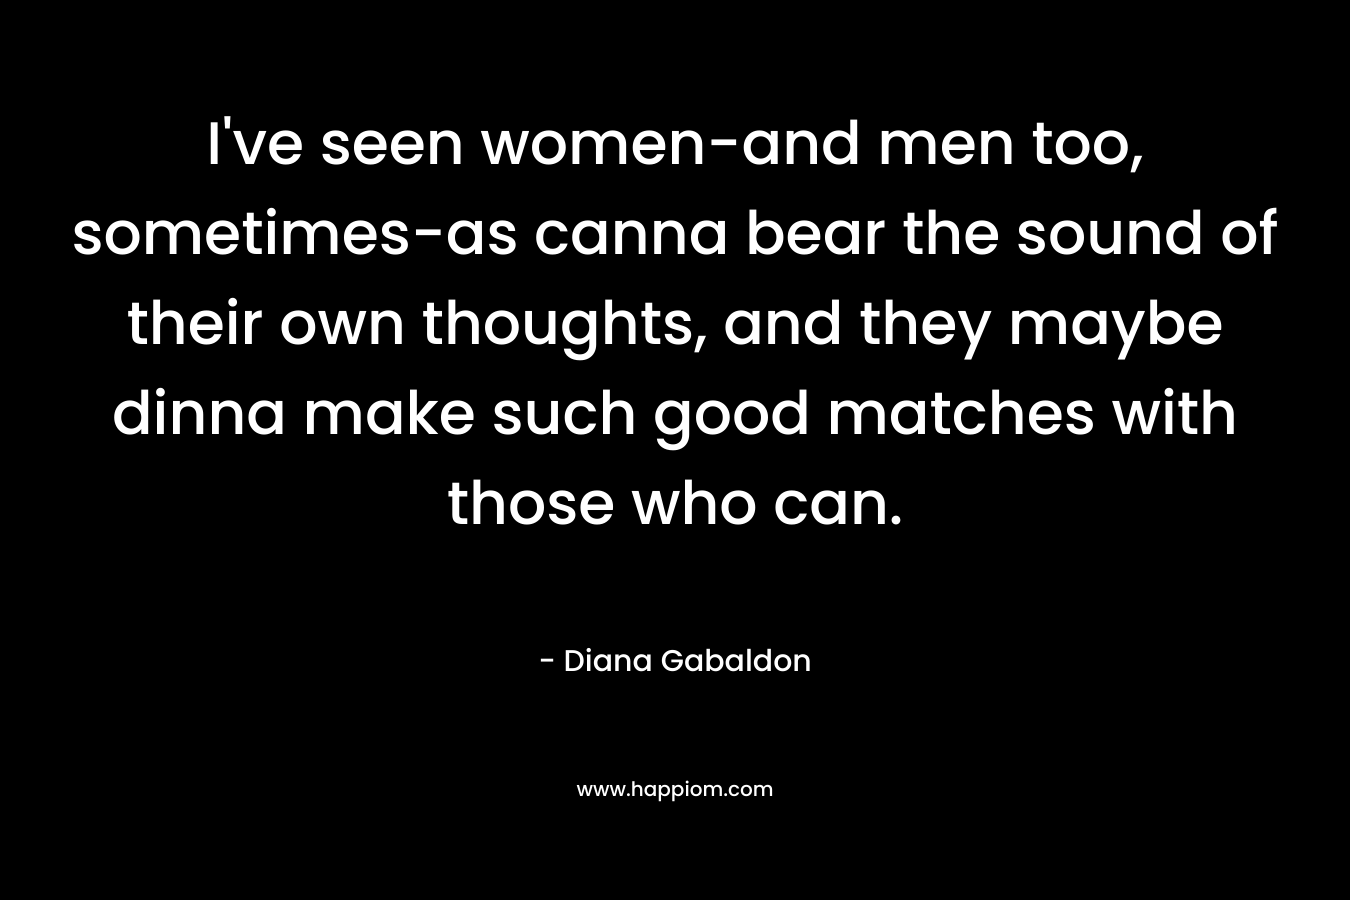 I've seen women-and men too, sometimes-as canna bear the sound of their own thoughts, and they maybe dinna make such good matches with those who can.